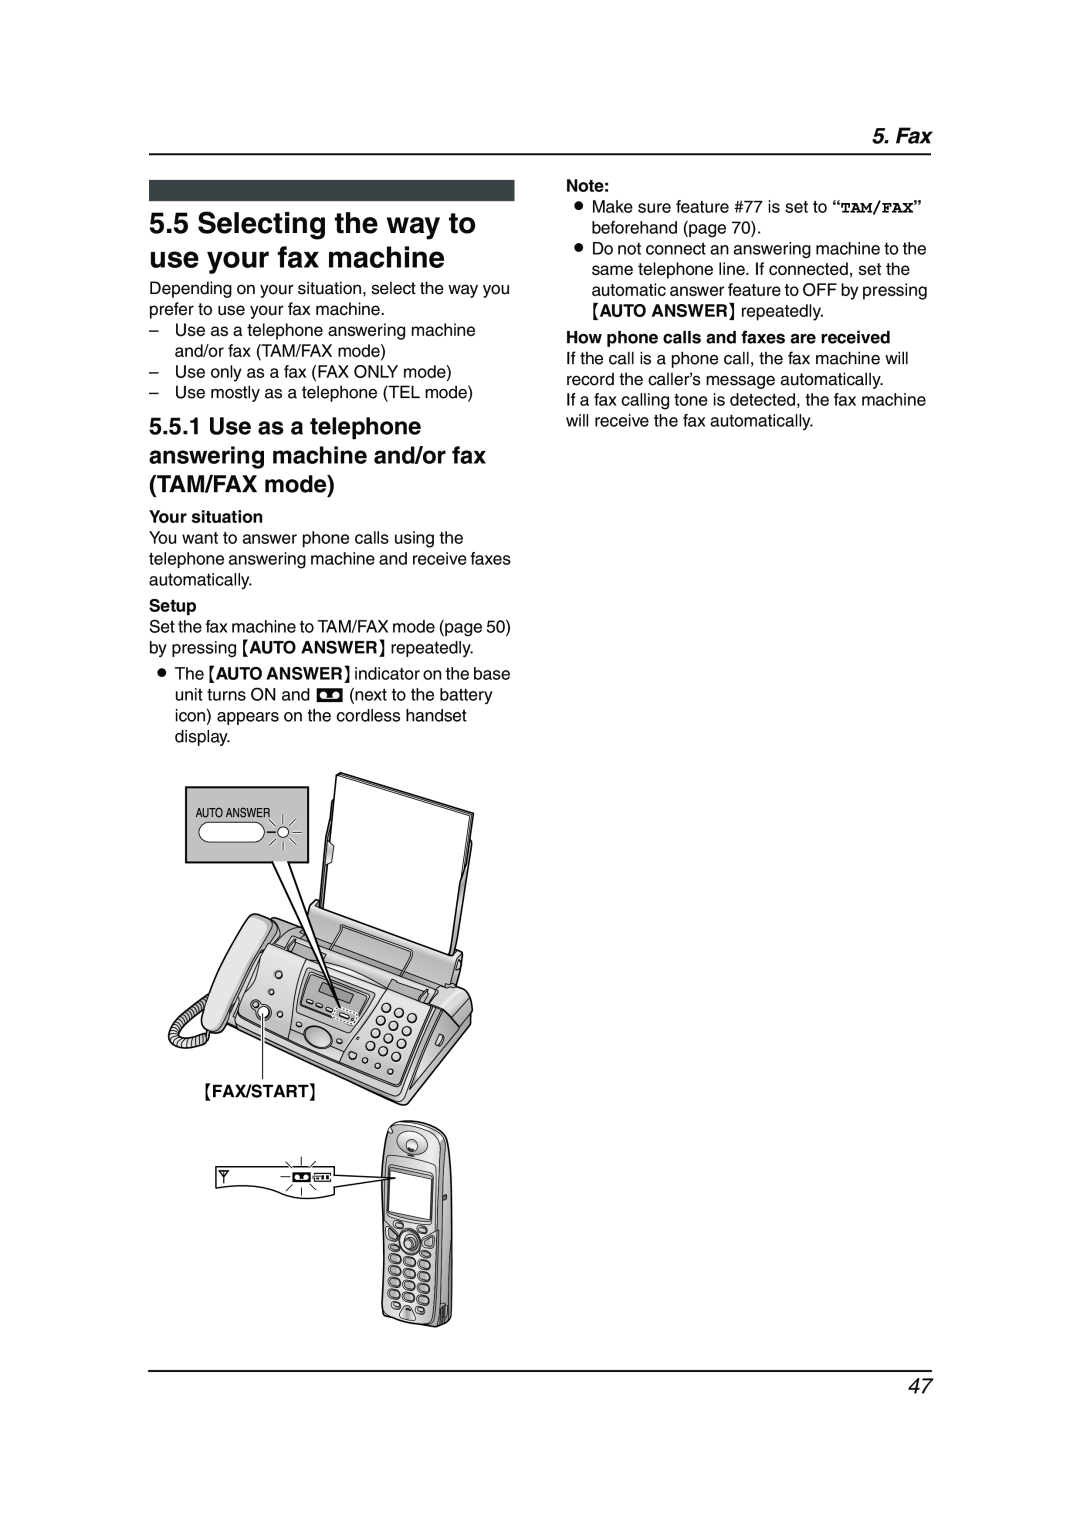 Panasonic KX-FC241AL manual Selecting the way to use your fax machine, Your situation, Setup, Fax/Start 